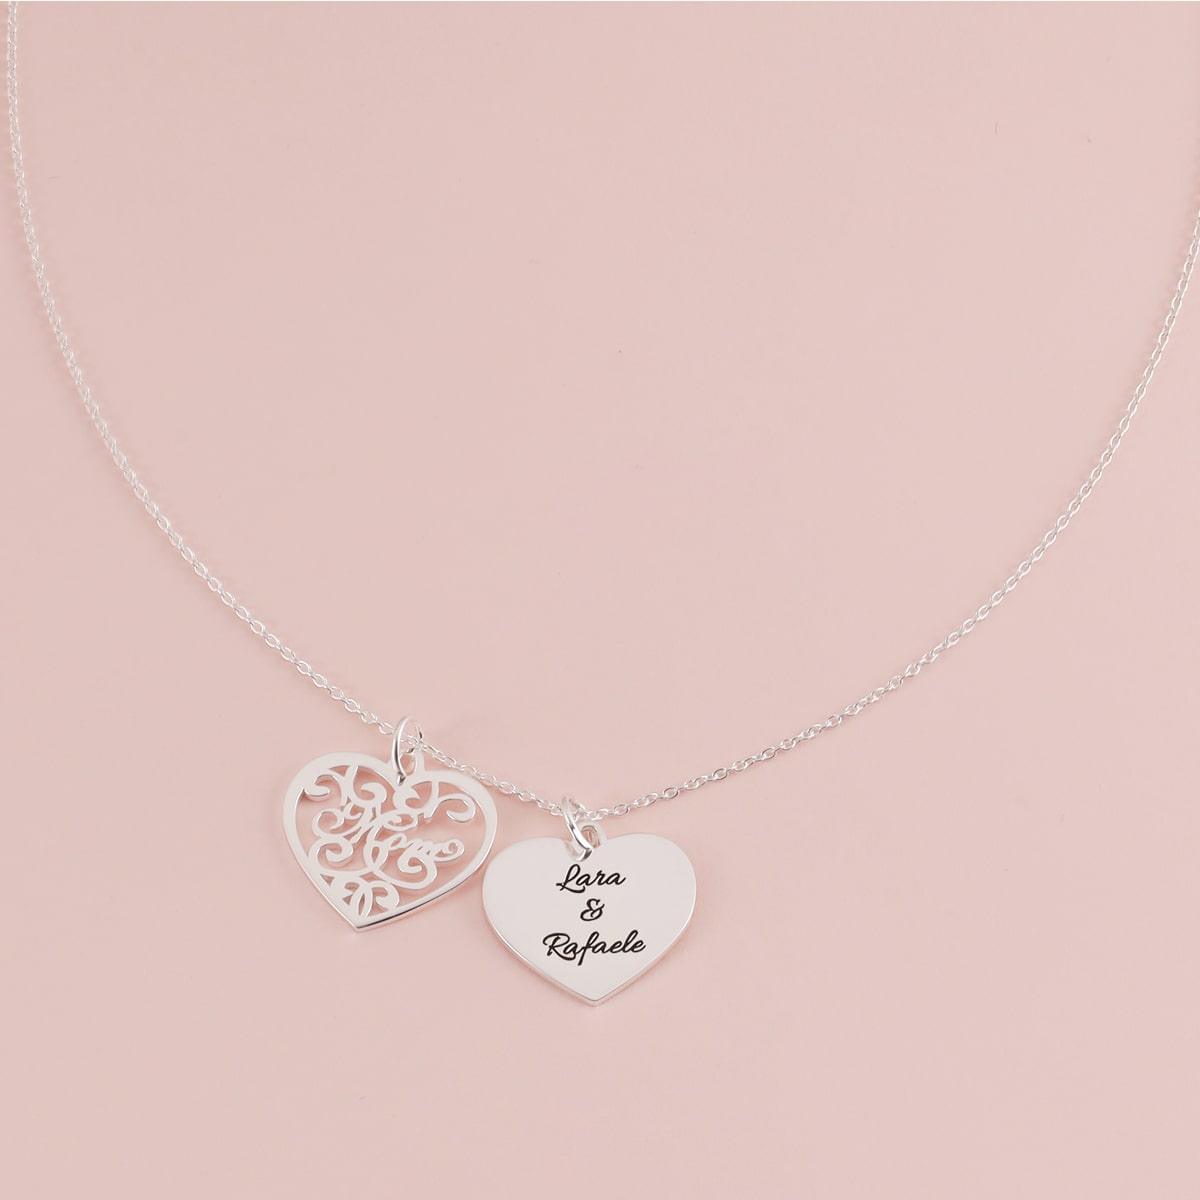 herzschmuck Engraved Necklaces Dual-Heart "Mom" Personalized Necklace